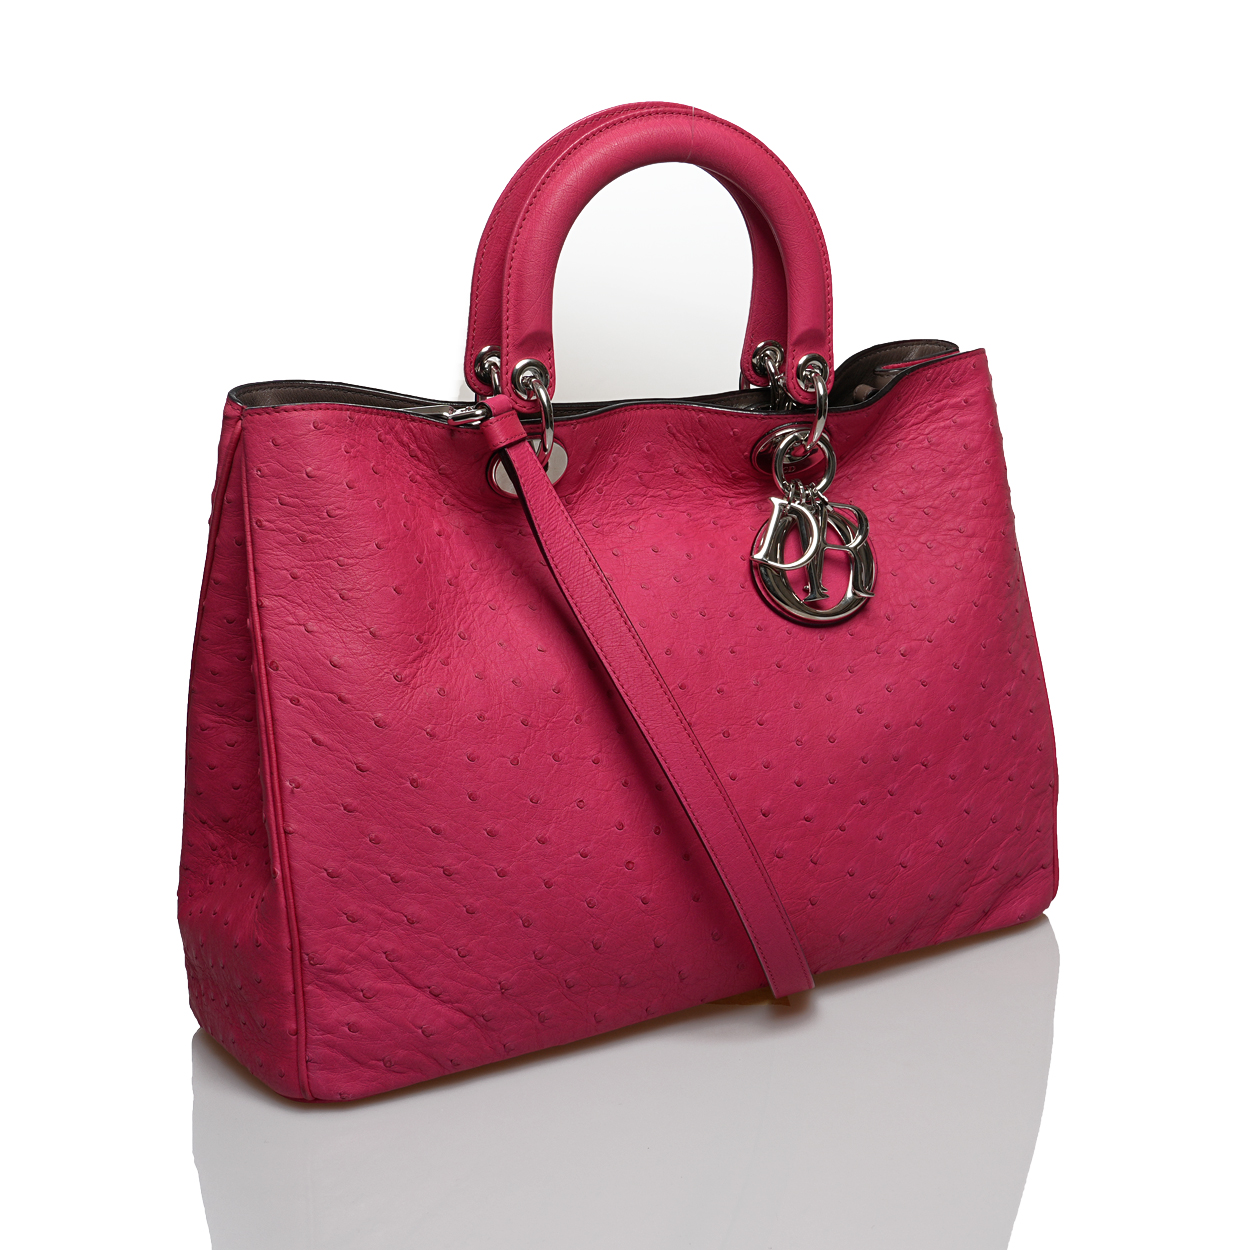 Christian Dior - Neon Pink Ostrich Leather Large Diorissimo Bag